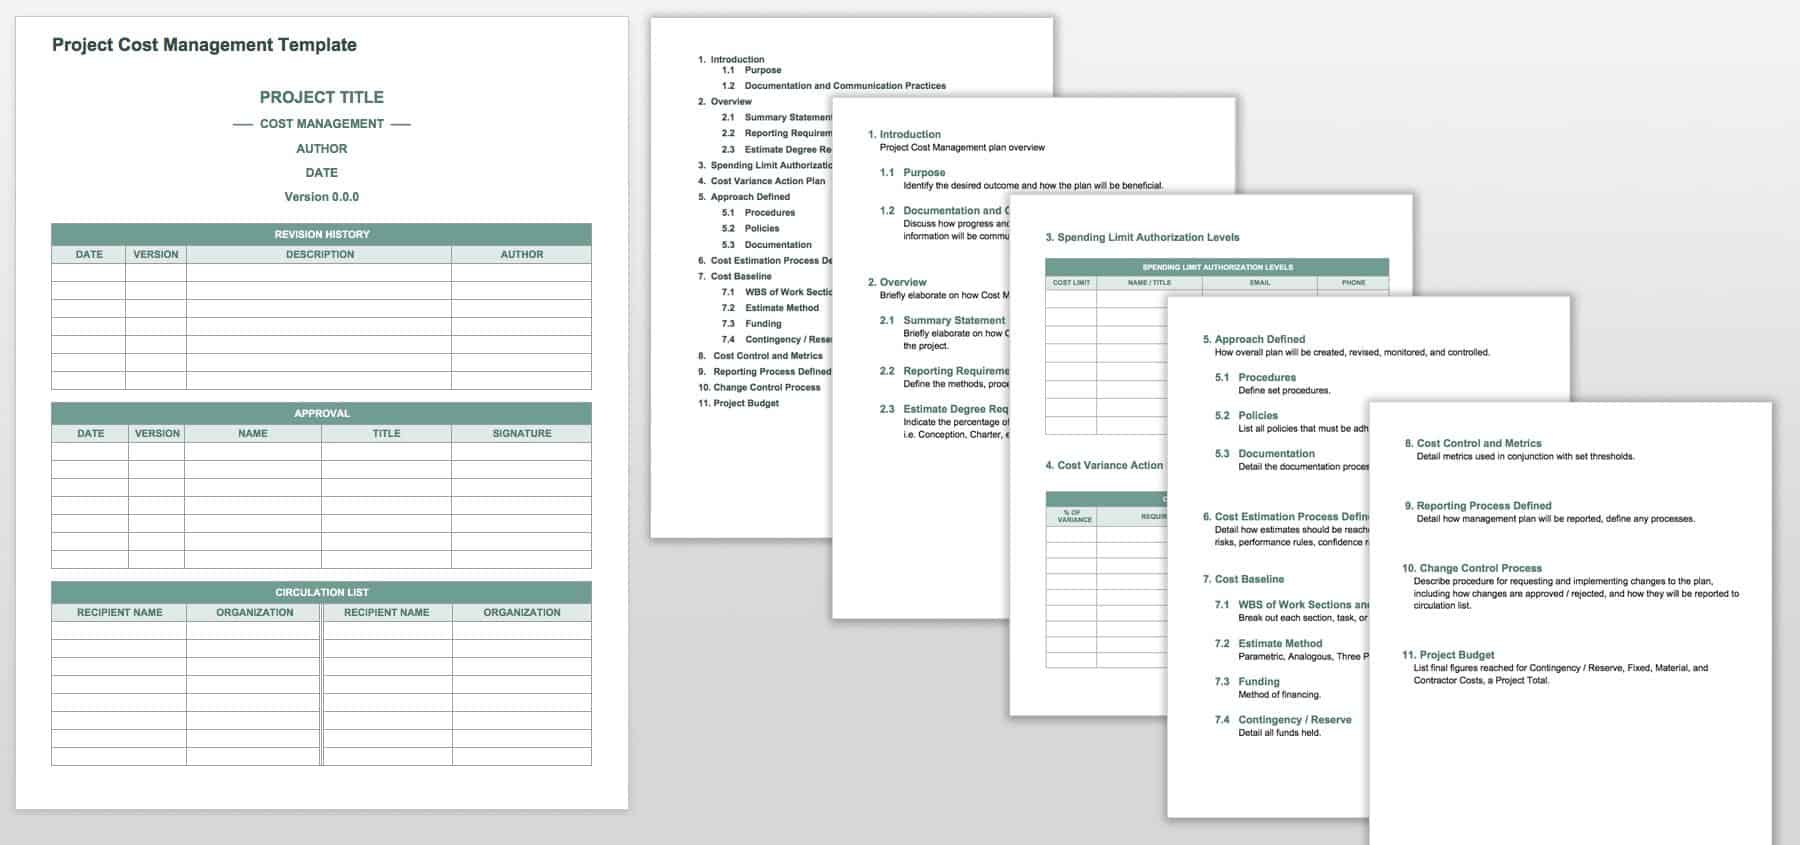 Project Cost Management Template